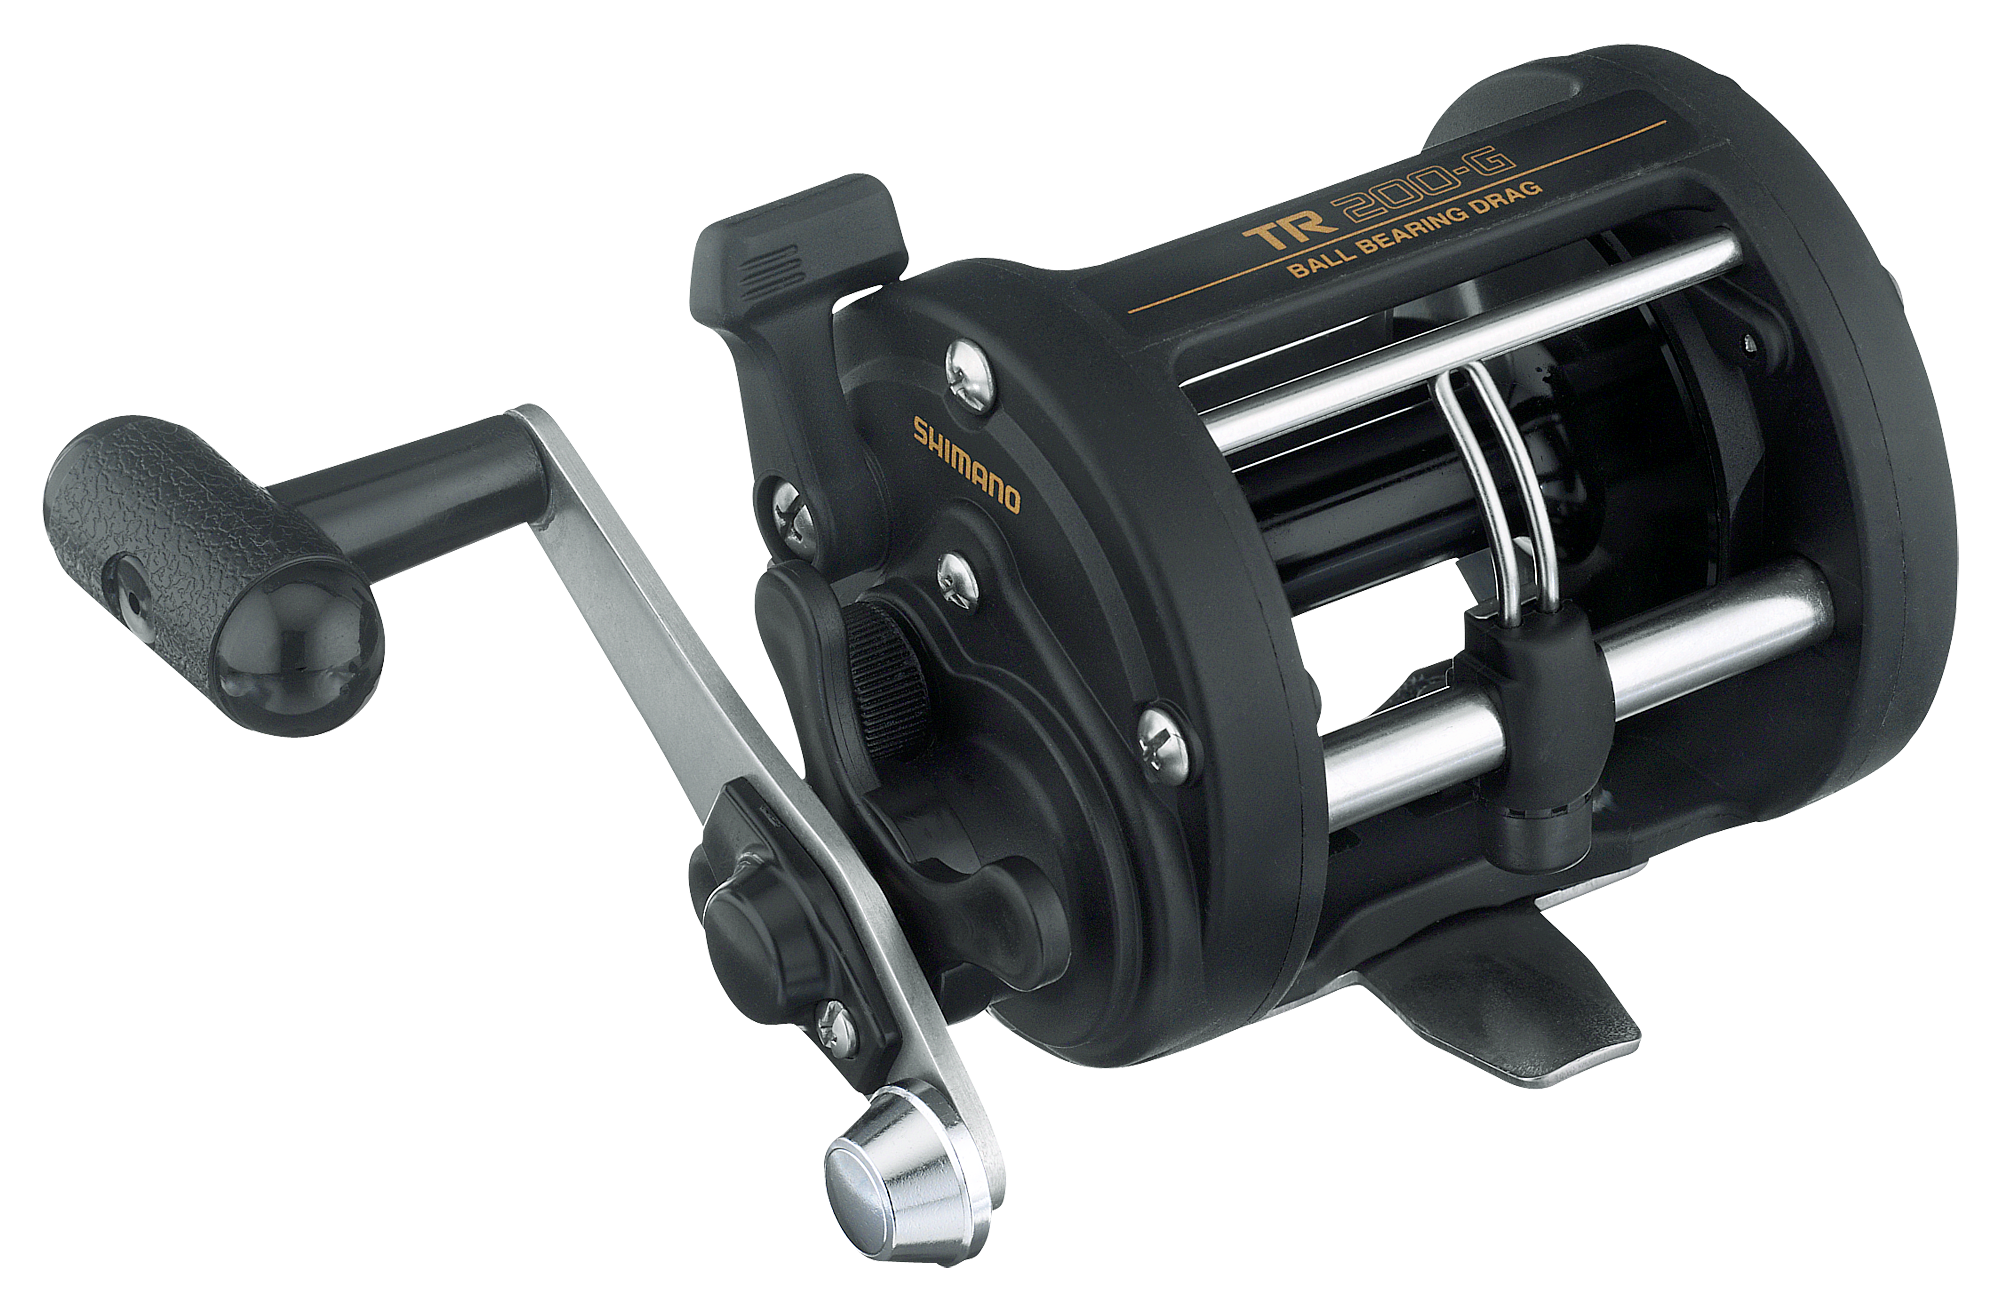 Fishing Reels For Sale - Shop for Spin, Overhead, Baitcast & more Page 8